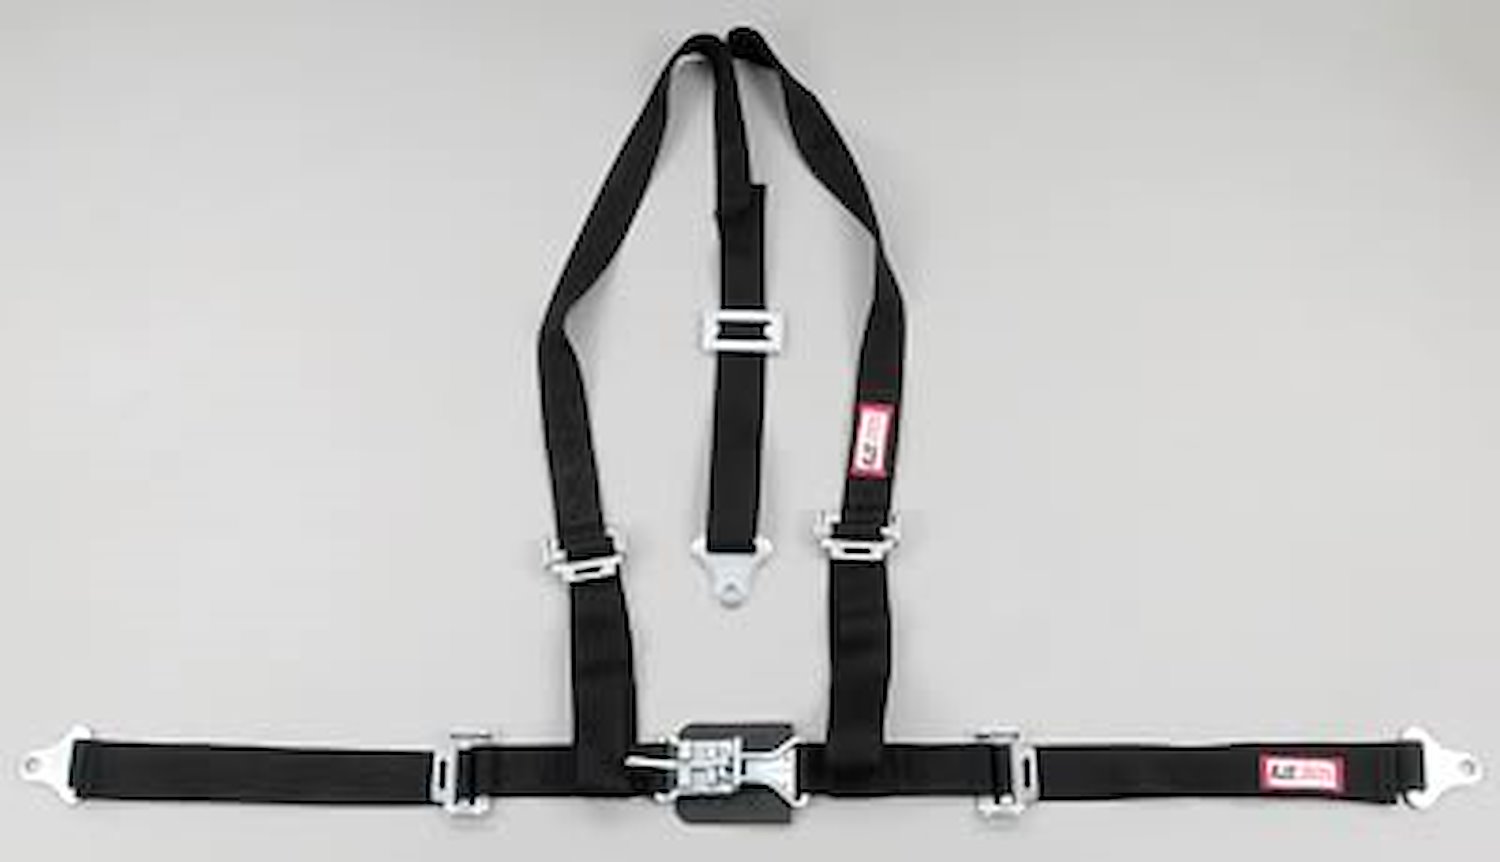 NON-SFI L&L HARNESS 3 PULL UP Lap BELT SEWN IN 2 S.H. Y FLOOR Mount w/STERNUM STRAP ALL WRAP ENDS YELLOW